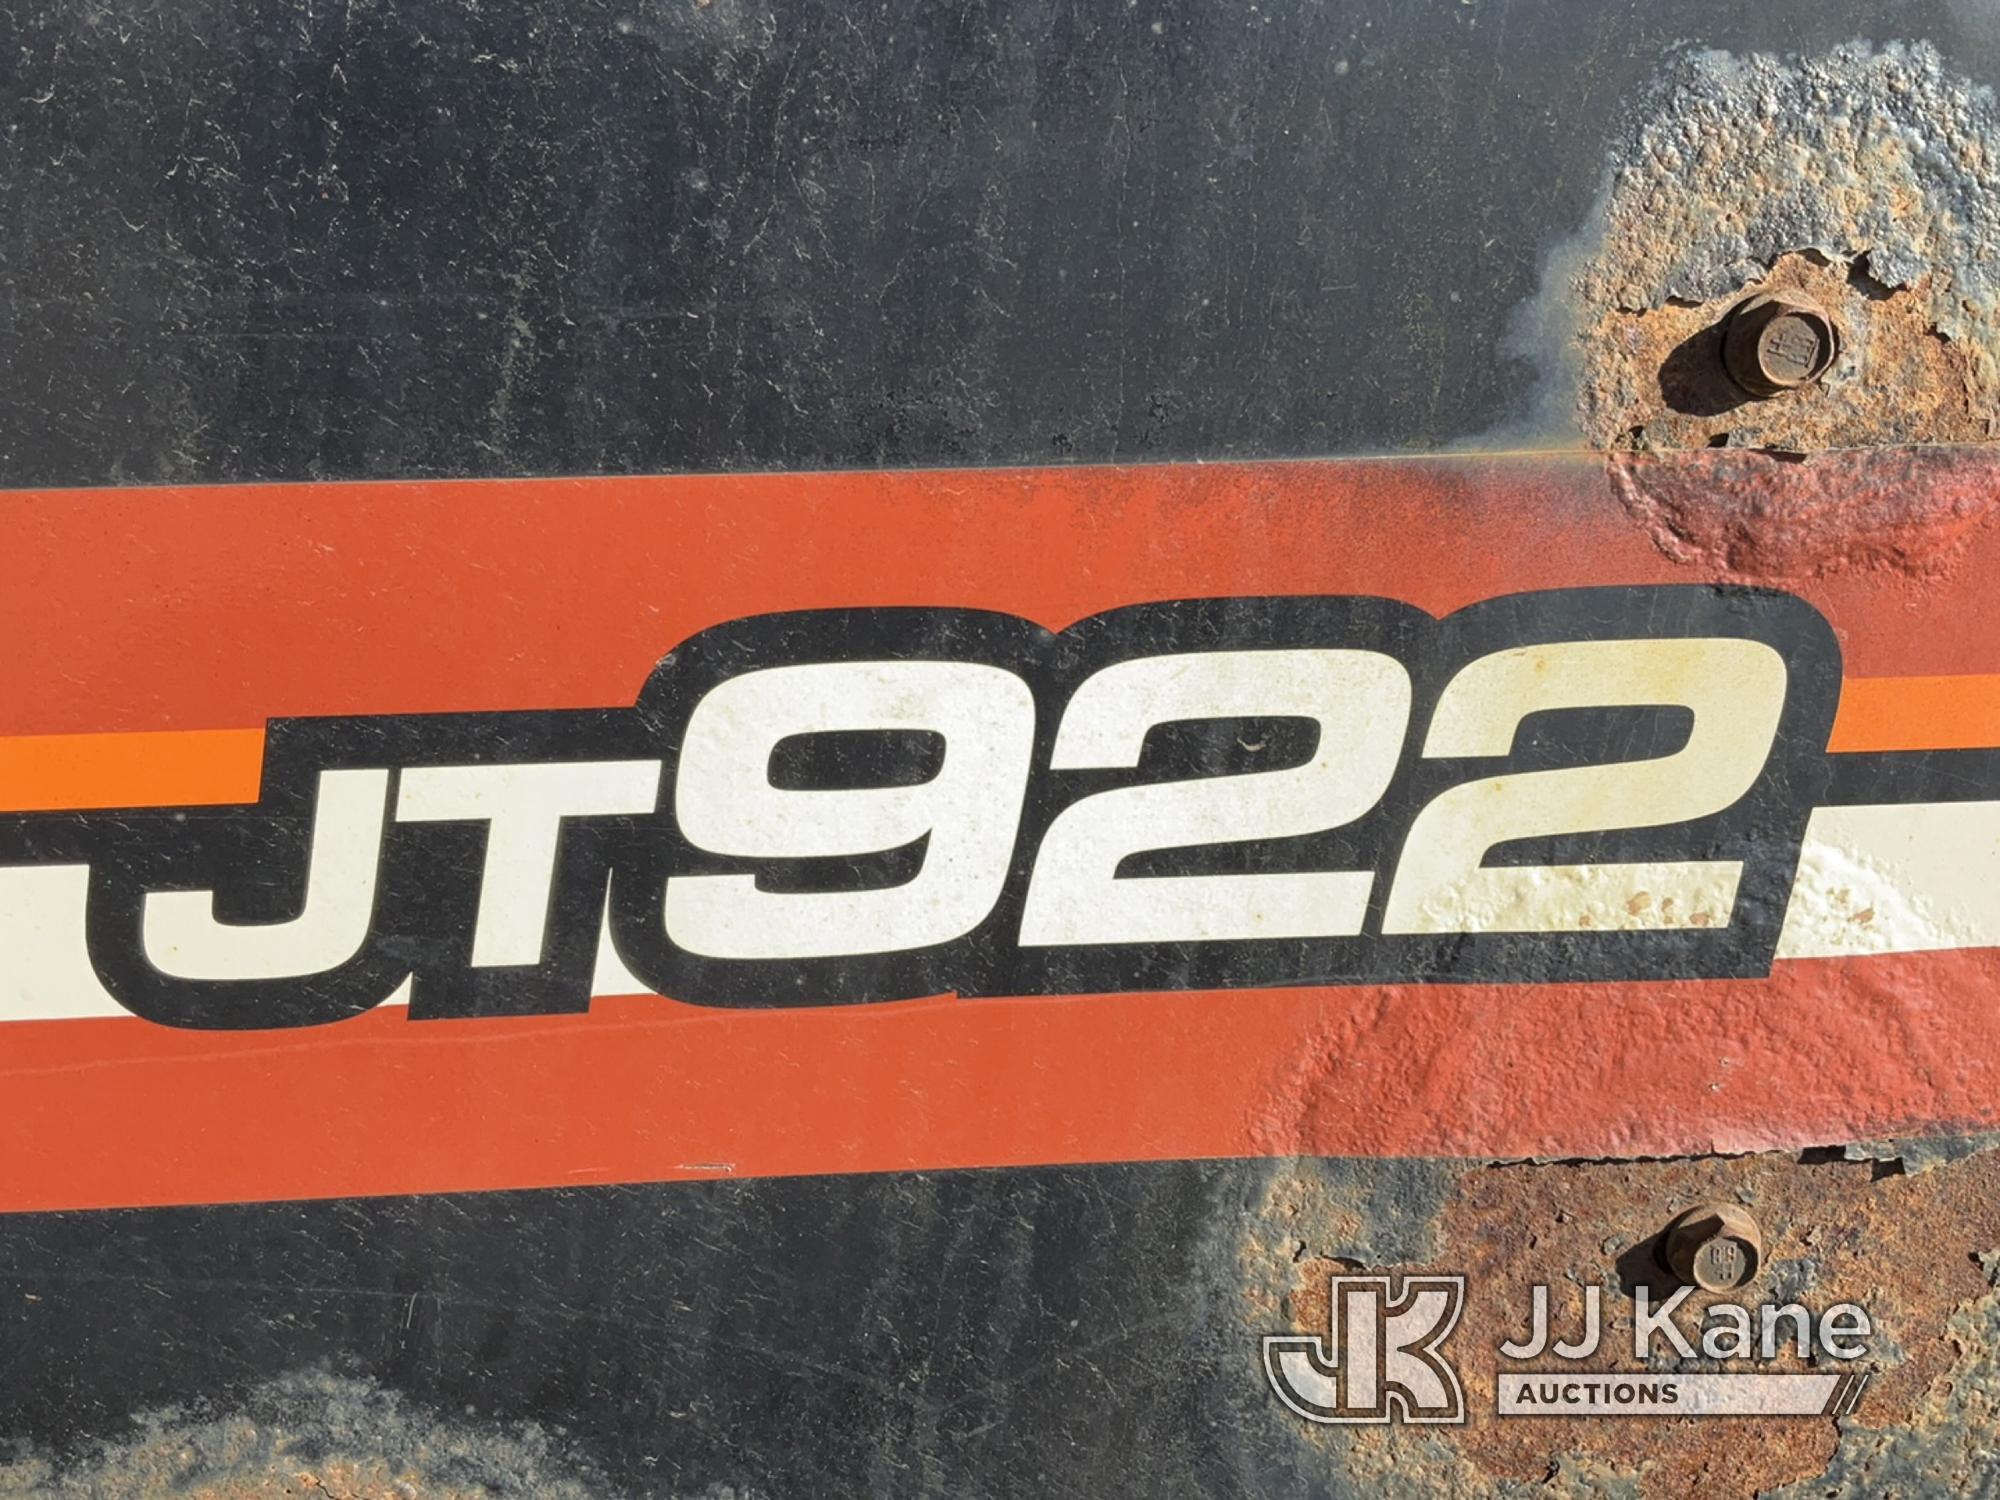 (South Beloit, IL) 2011 Ditch Witch JT922 Directional Boring Machine Condition Unknown) (Seller Stat